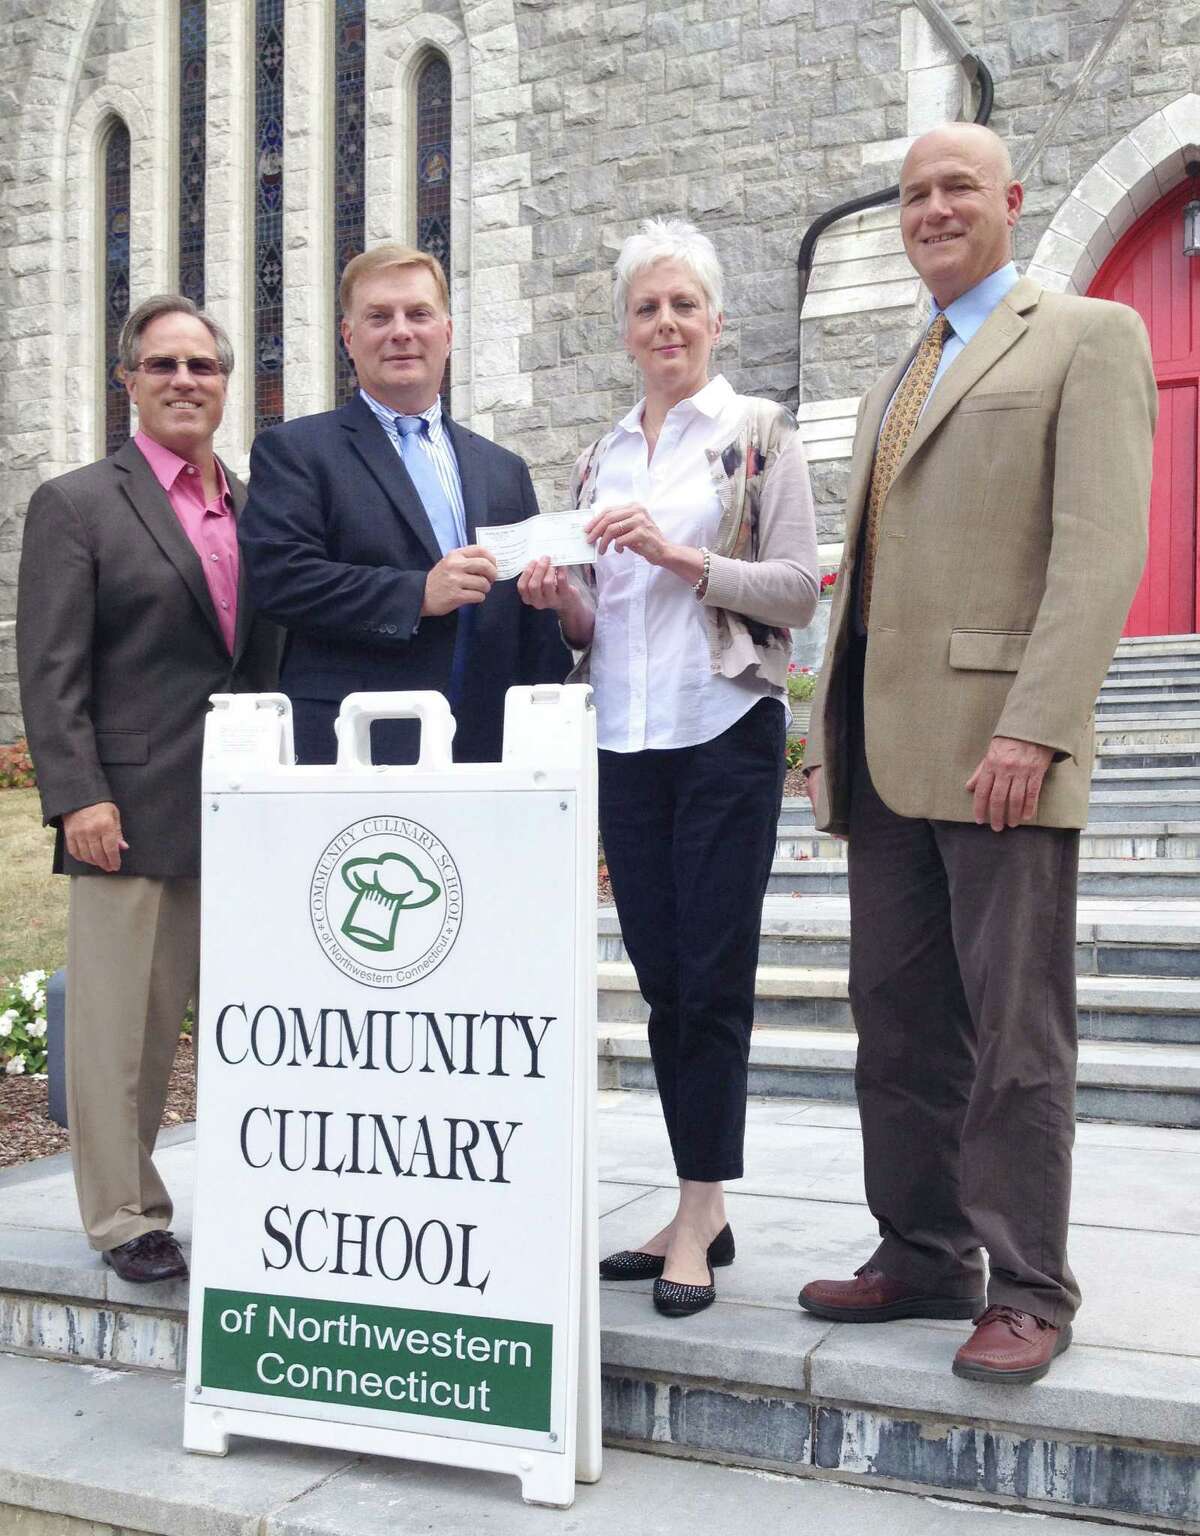 Supporting the culinary arts The Community Culinary School of Northwestern Connecticut based in New Milford was recently the beneficiary of a donation from Nicholas/Tobin & Associates totaling $6,200. The donation was raised at the 10th annual A Taste of New Milford held Sept. 9, 2015, on the Village Green in town. The Greater New Milford Chamber of Commerce event, which is sponsored and organized by Nicholas/Tobin & Associates Insurance, drew over 850 people to sample delicacies from over 30 restaurants, bakers and caterers. Local wineries and breweries were also in attendance. Above, Dawn Hammacott, executive director of the school, second from right, is presented by the check by, from left to right, Kyle Brady, regional sales representative at Nicholas/Tobin, Richard Herrington, president of Nicholas/Tobin, and Jeffrey Kilberg, vice president of Nicholas/Tobin. For more information about the school, call 203-512-5791 or visit www.communityculinaryschool.org. Courtesy of the Community Culinary School of Northwestern Connecticut